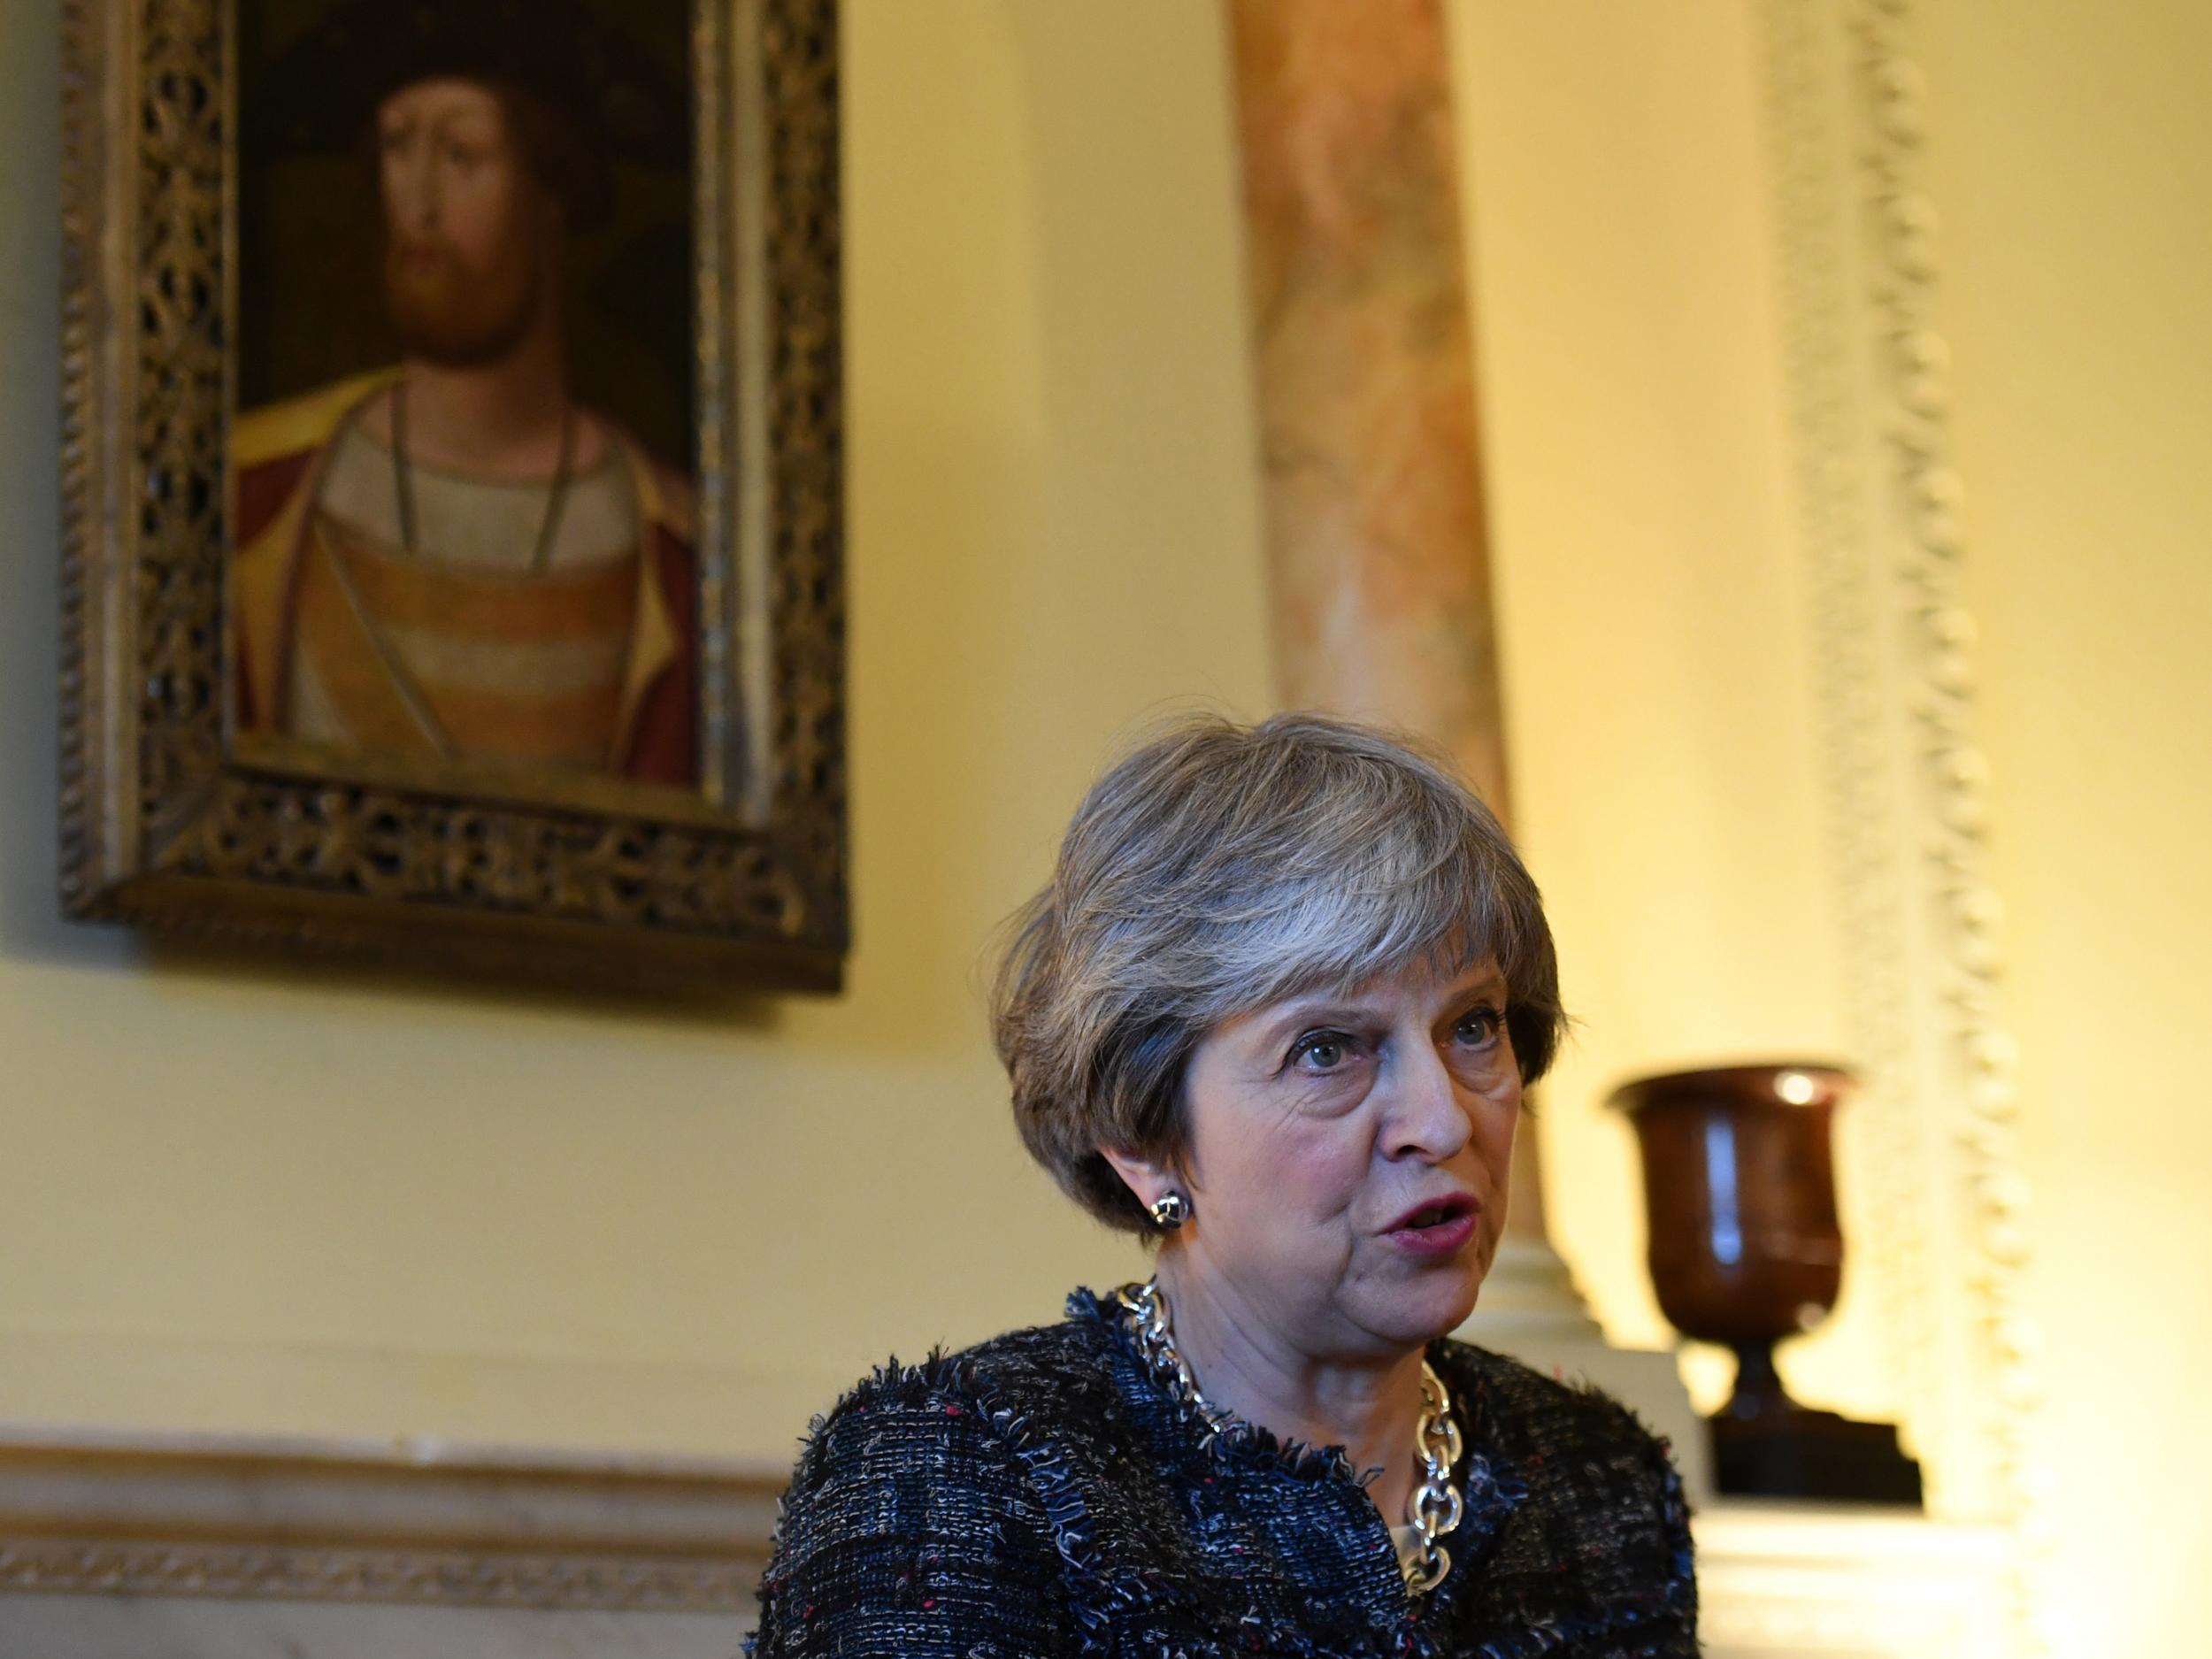 Last week, Theresa May unveiled plans for protection under the Government’s new Domestic Abuse Bill